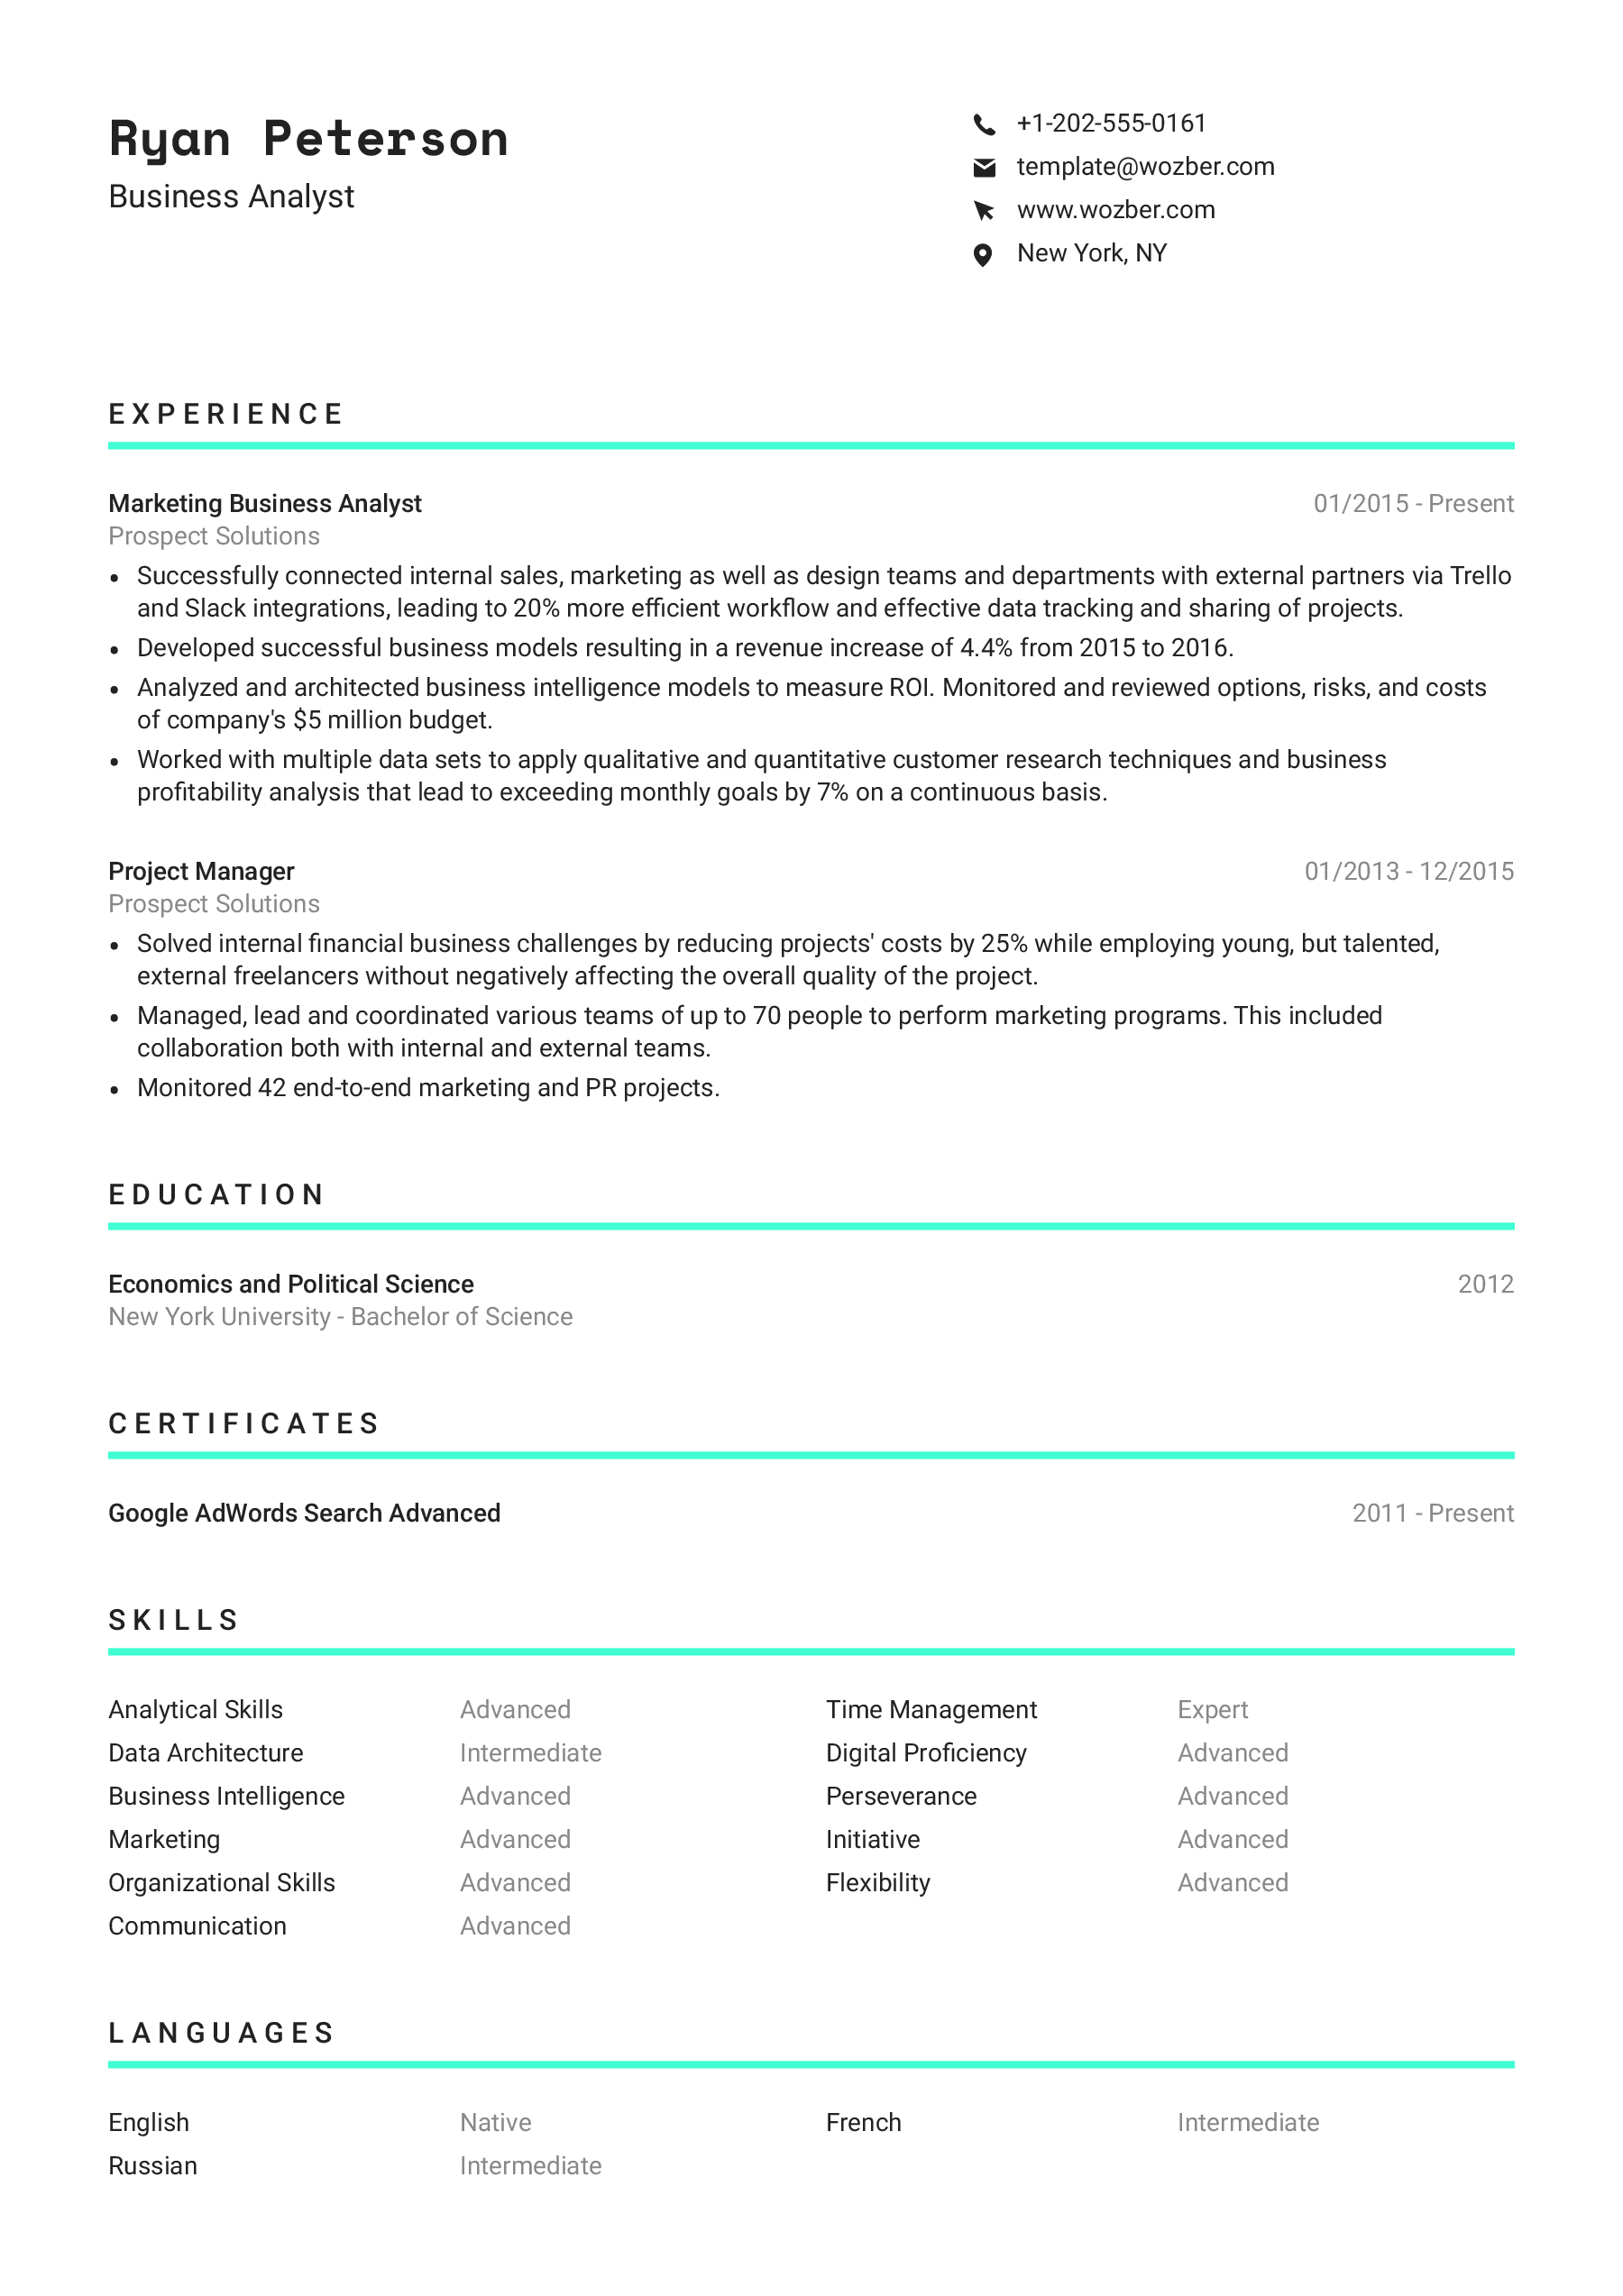 A single-column, creative yet ATS-friendly CV template for those who seek a bold and futuristic look.